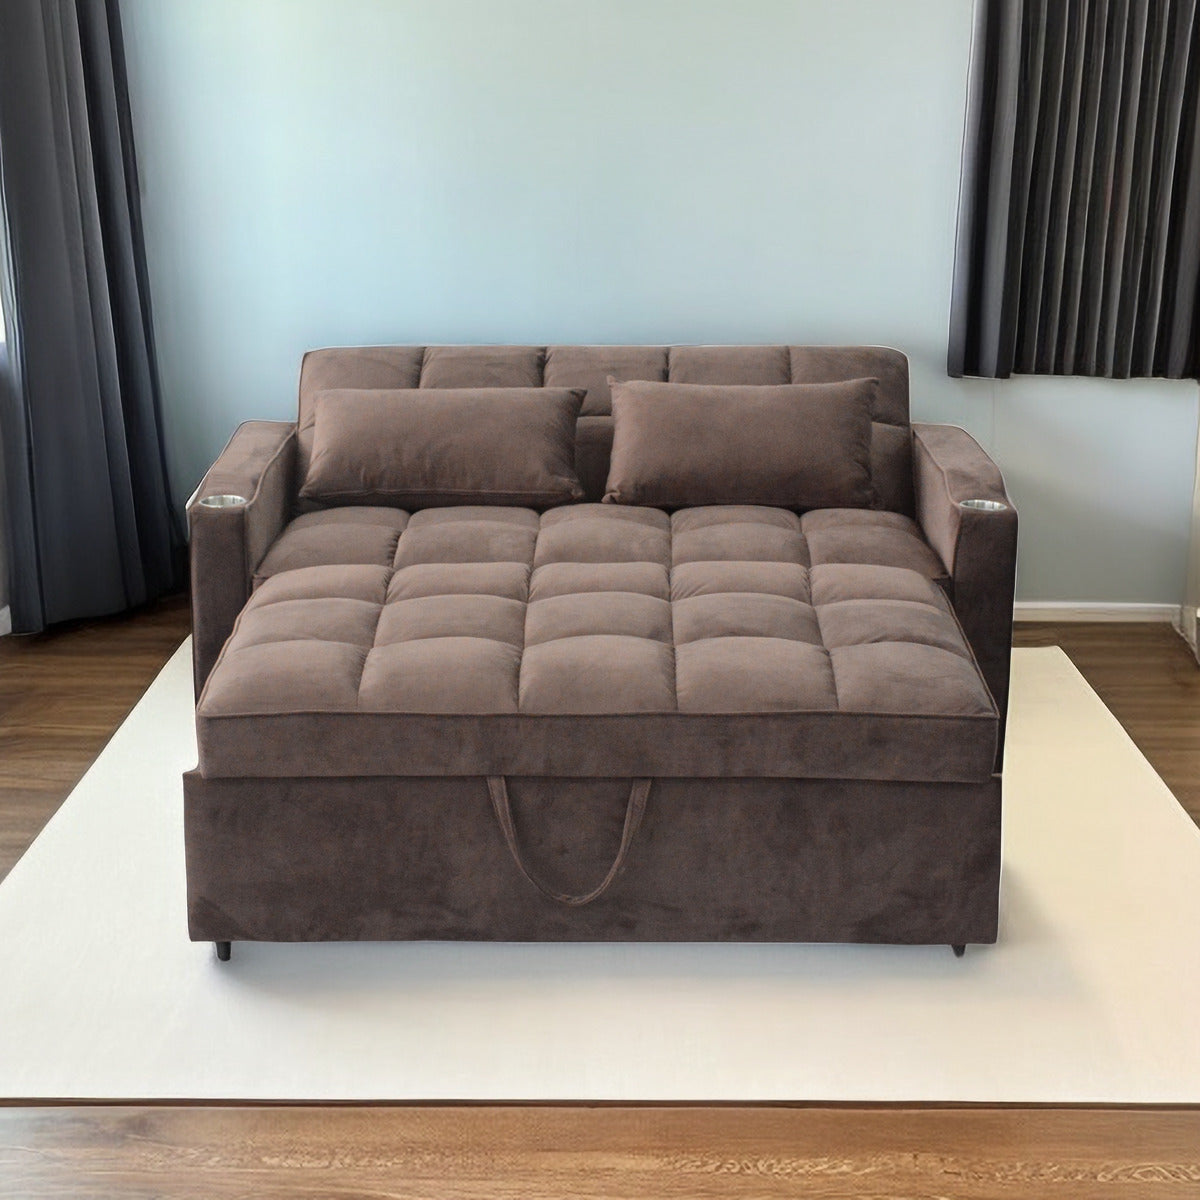 Lazy Sofa Bed,Luxury Seating Foldable Sofa Bed,